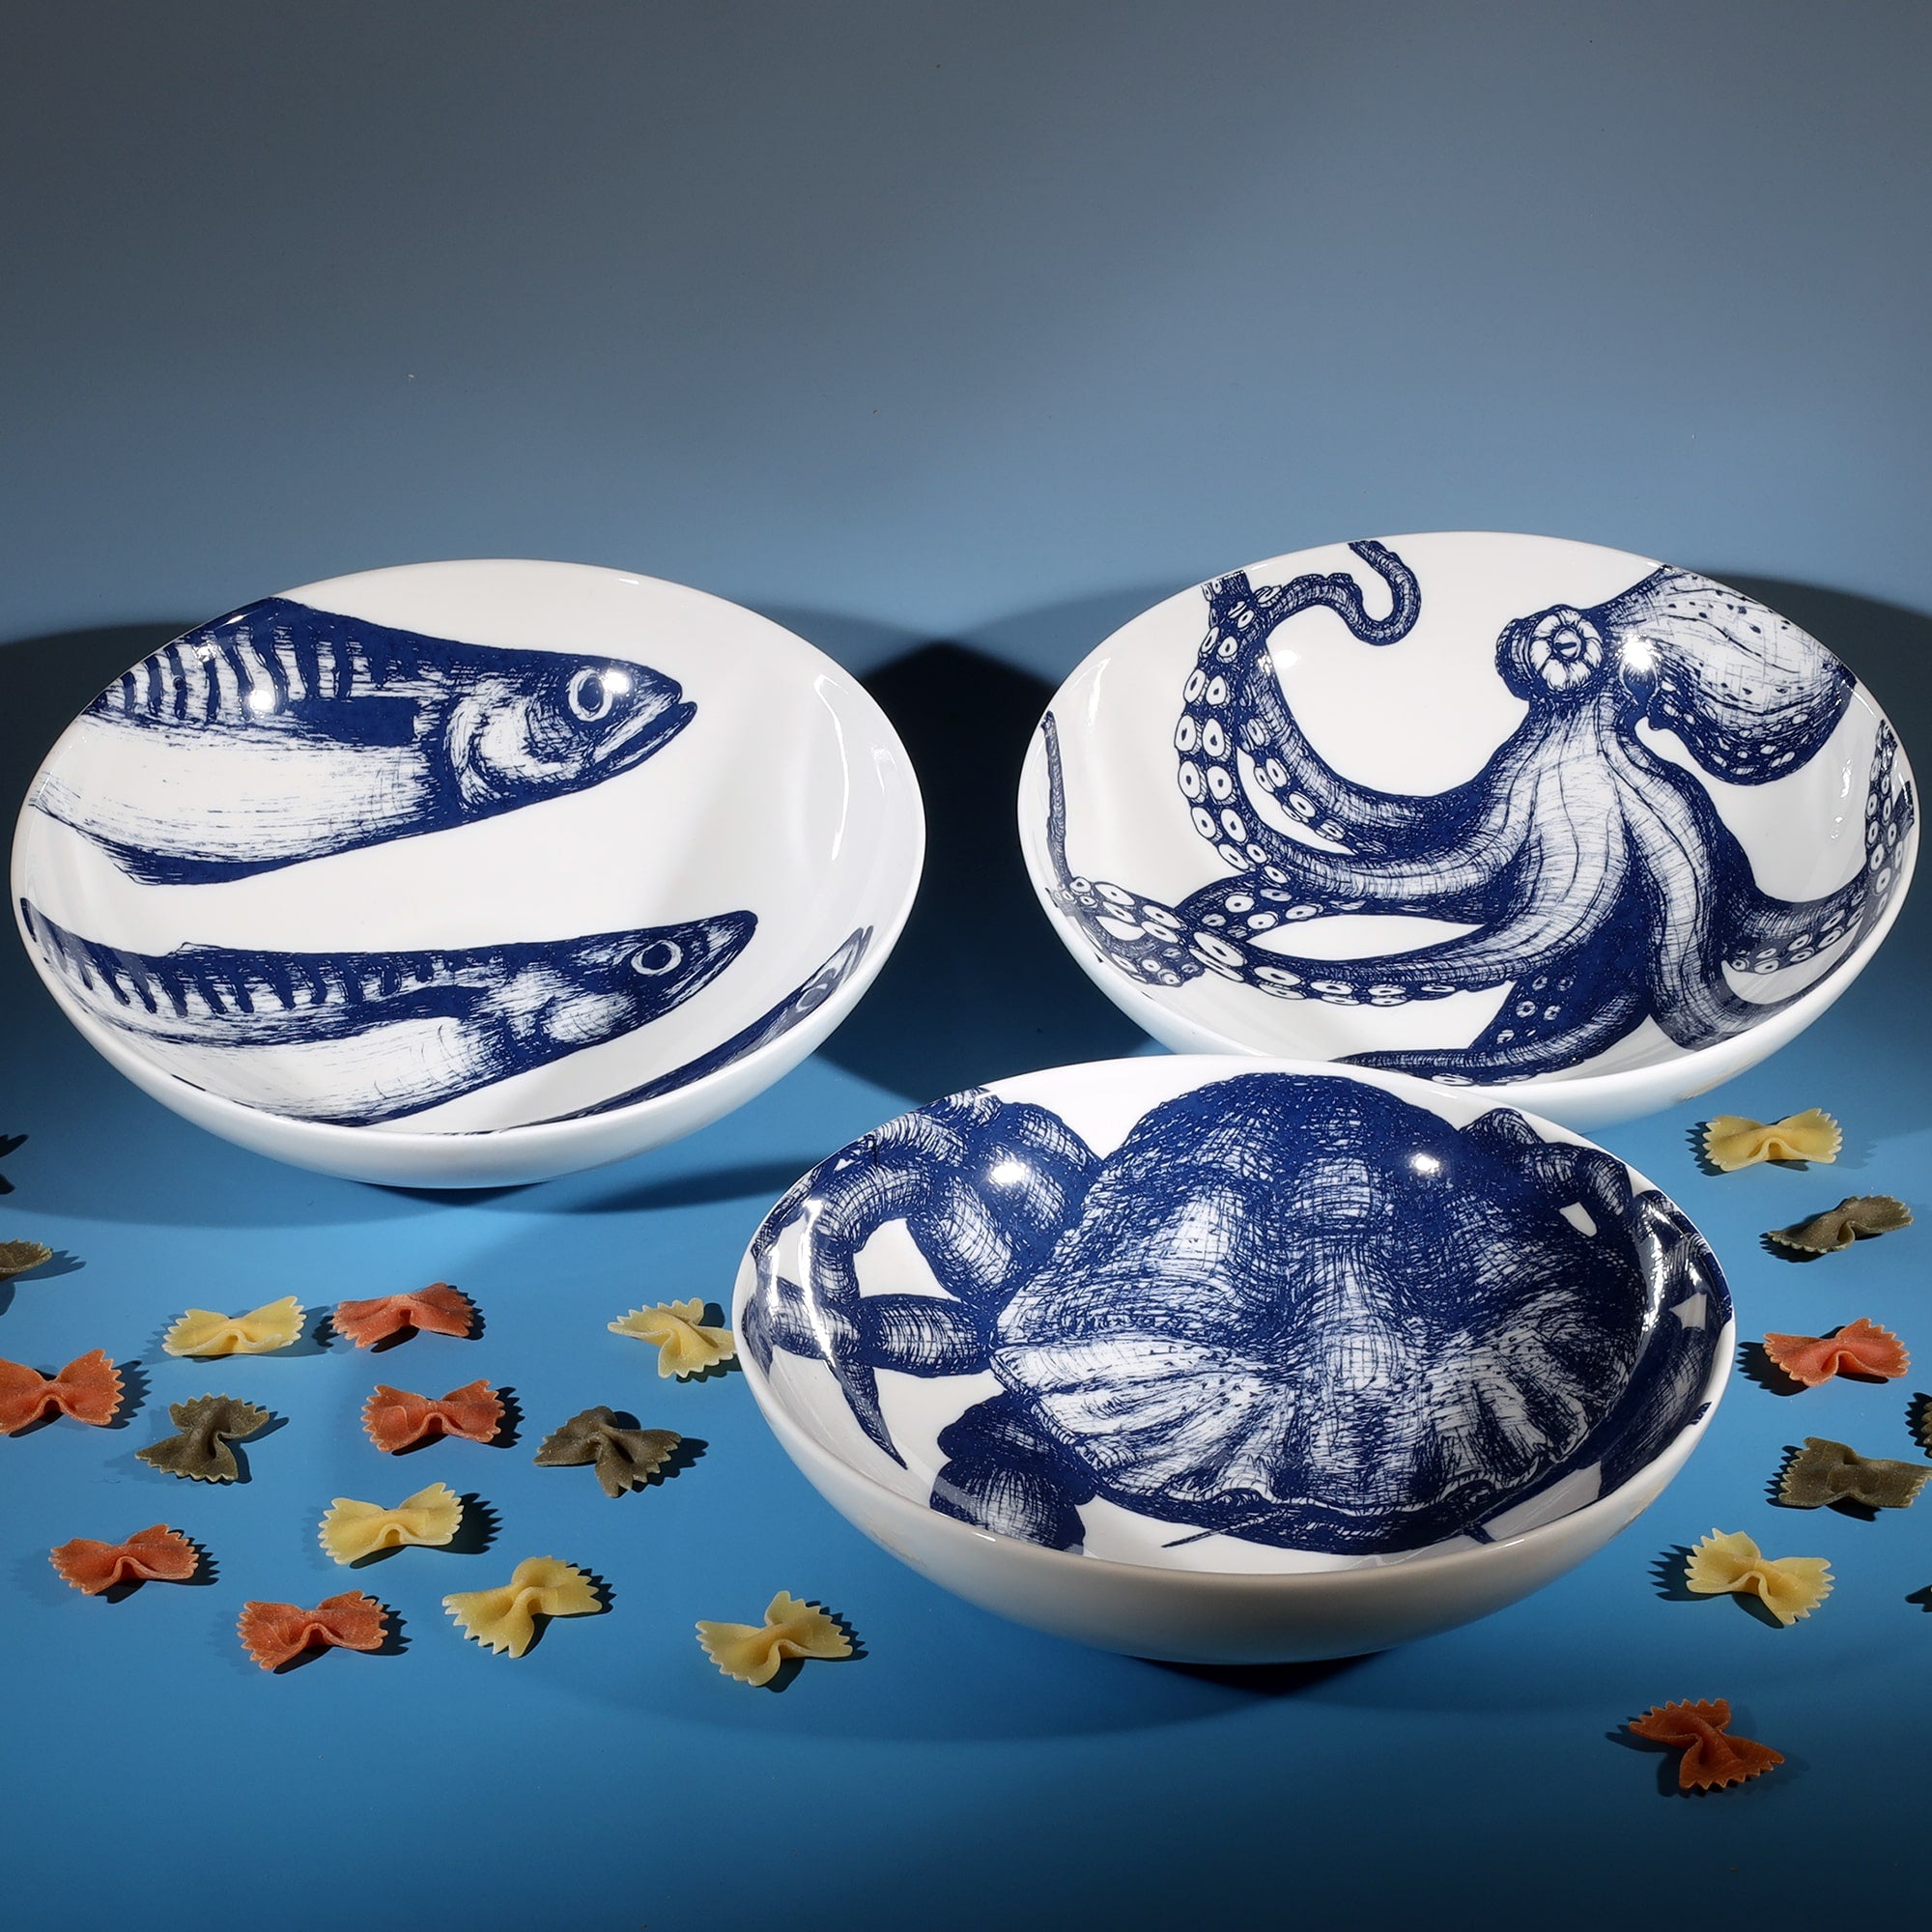 Pasta bowl in Bone China in our Classic range in Navy and white in the Octopus design next to a Mackerel and an Crab bowl.In between them are several pieces of decorative colourful pasta